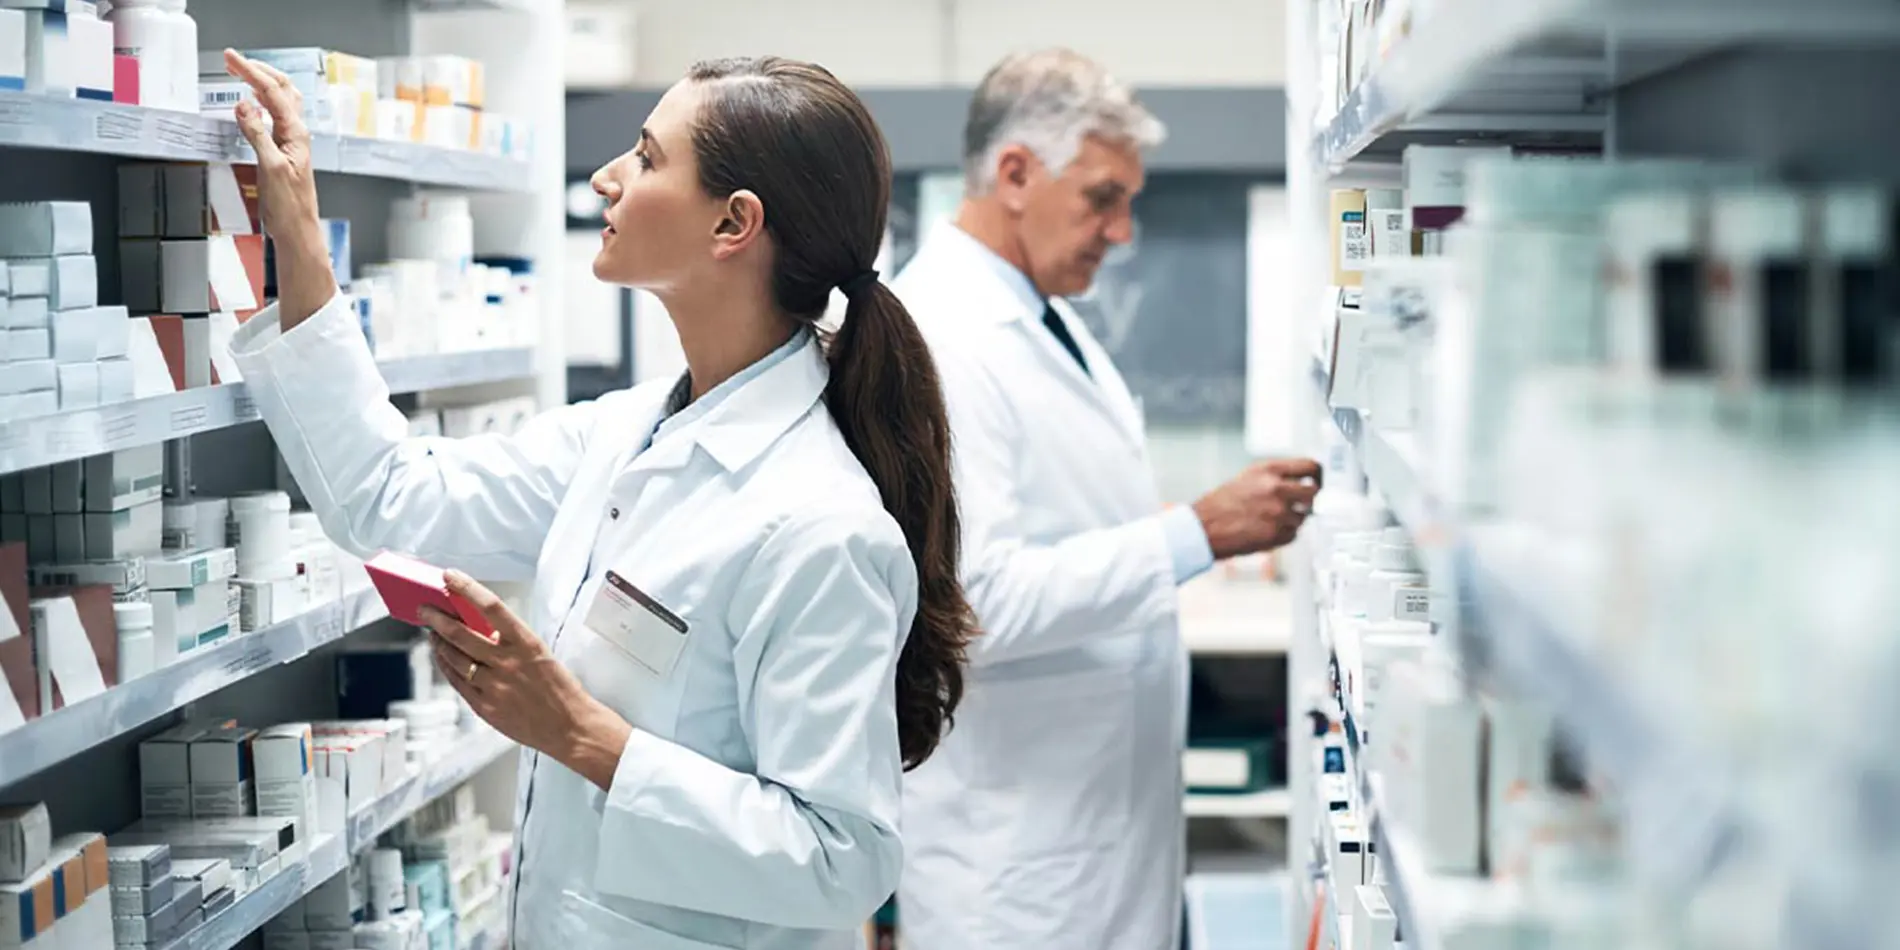 Two people are looking at pill bottles on shelves in a pharmacy. They are wearing lab coats.